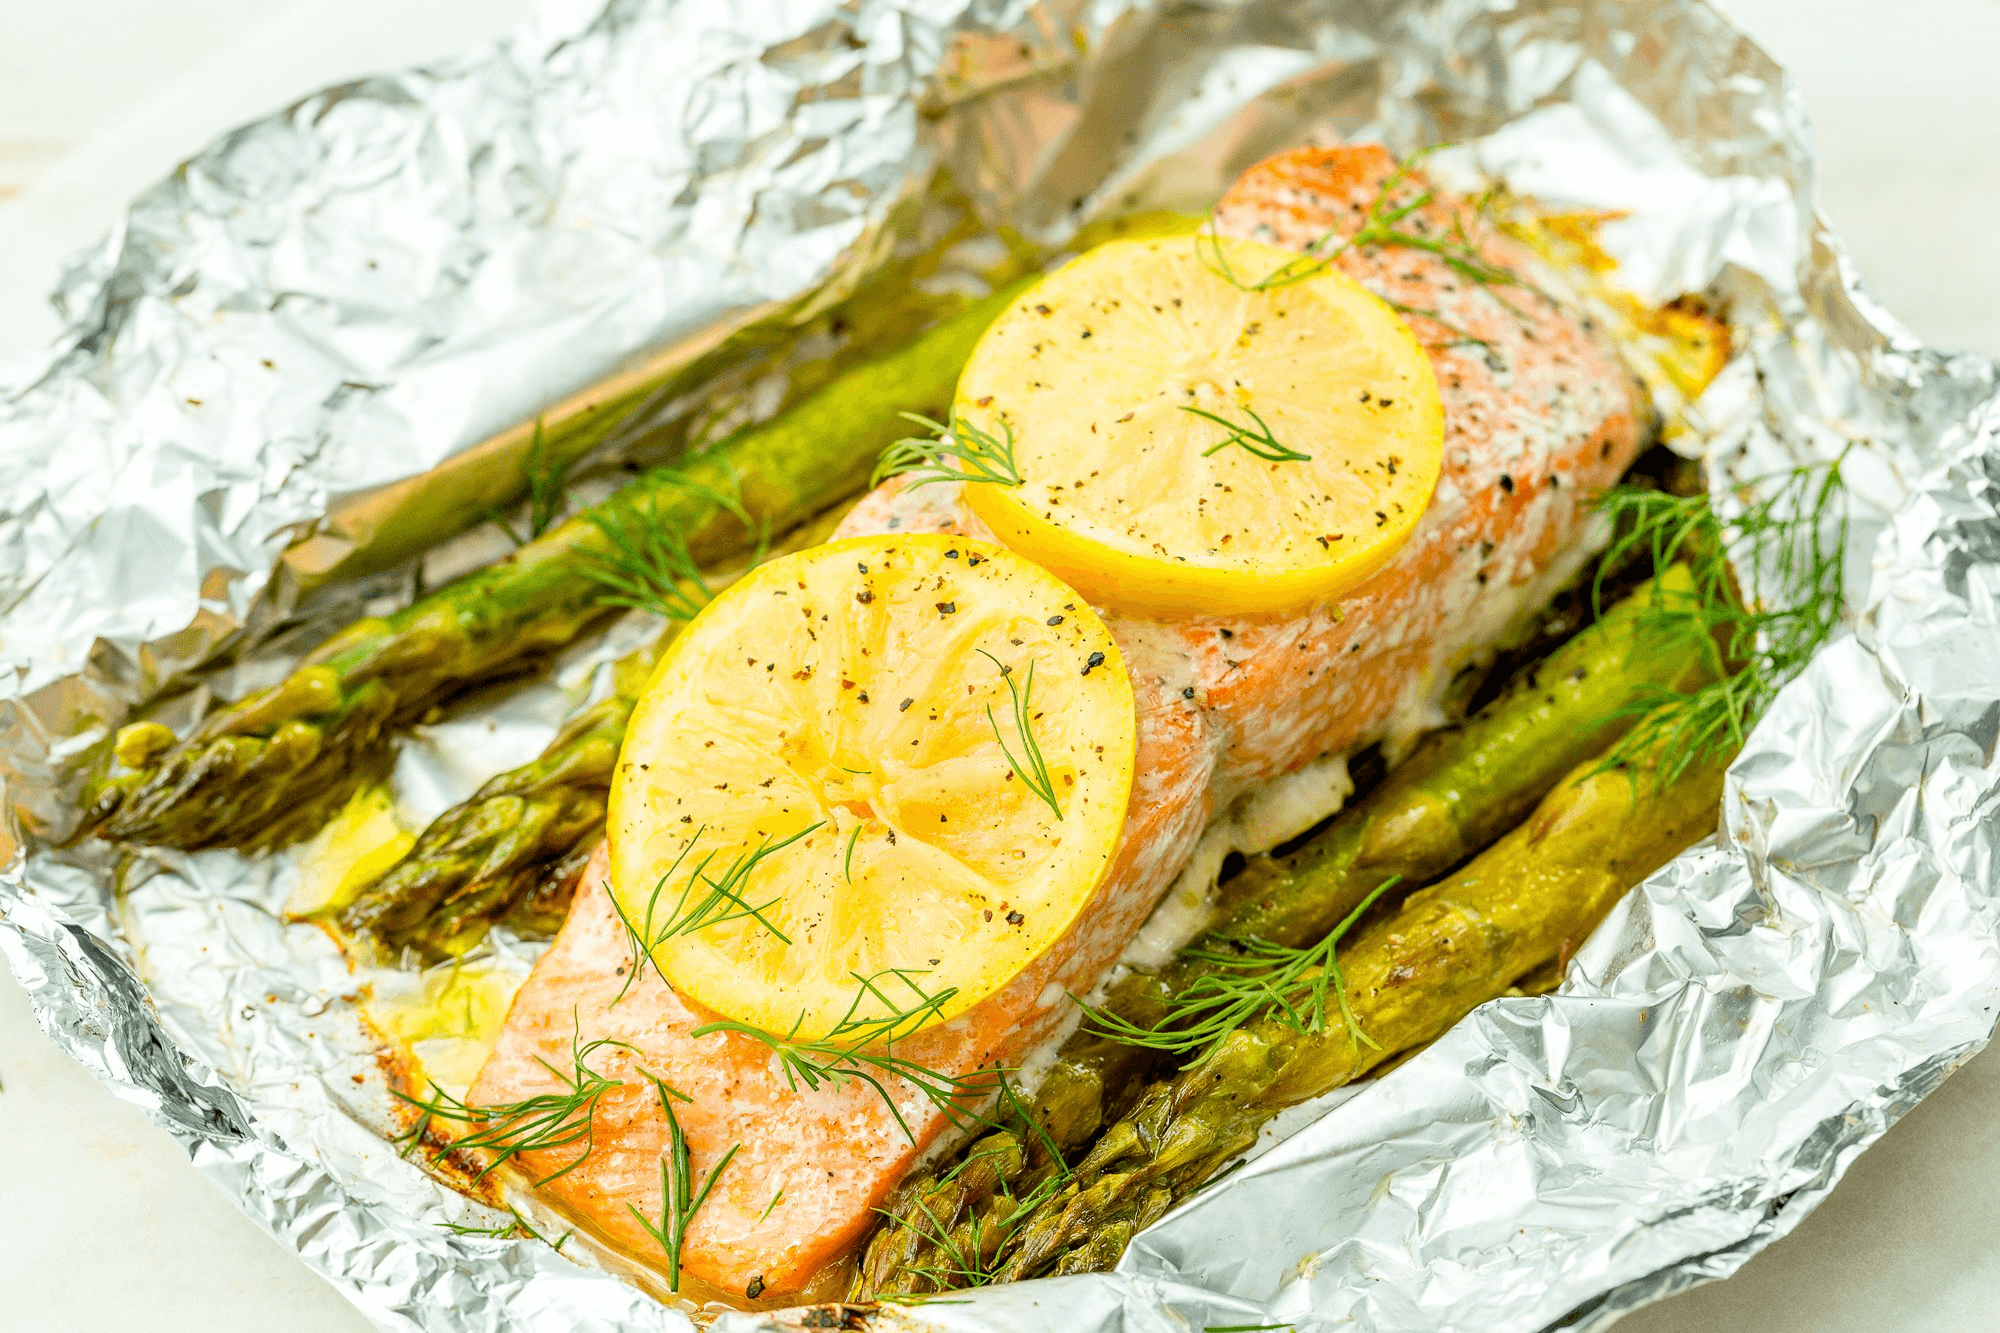 grilled salmon with lemon wedges and asparagus in foil